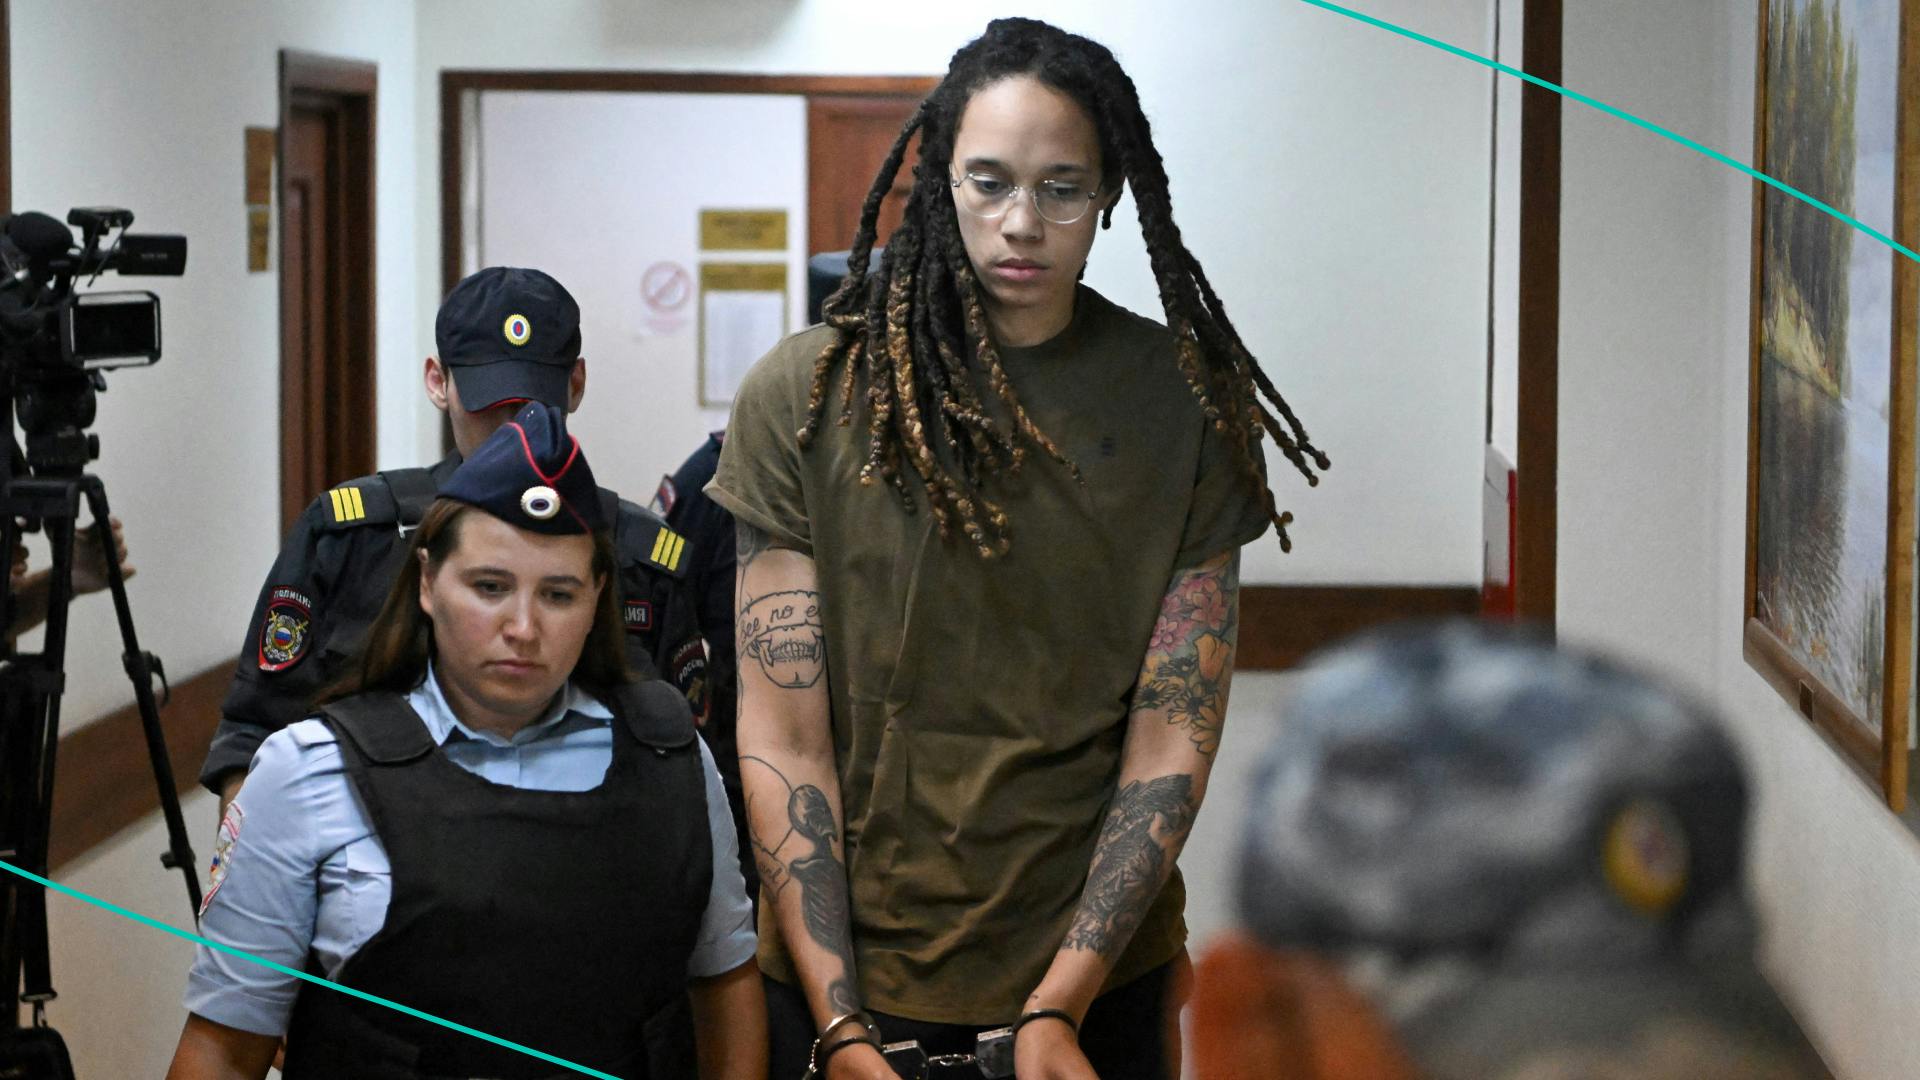 Brittney Griner in the custody of Russian officials